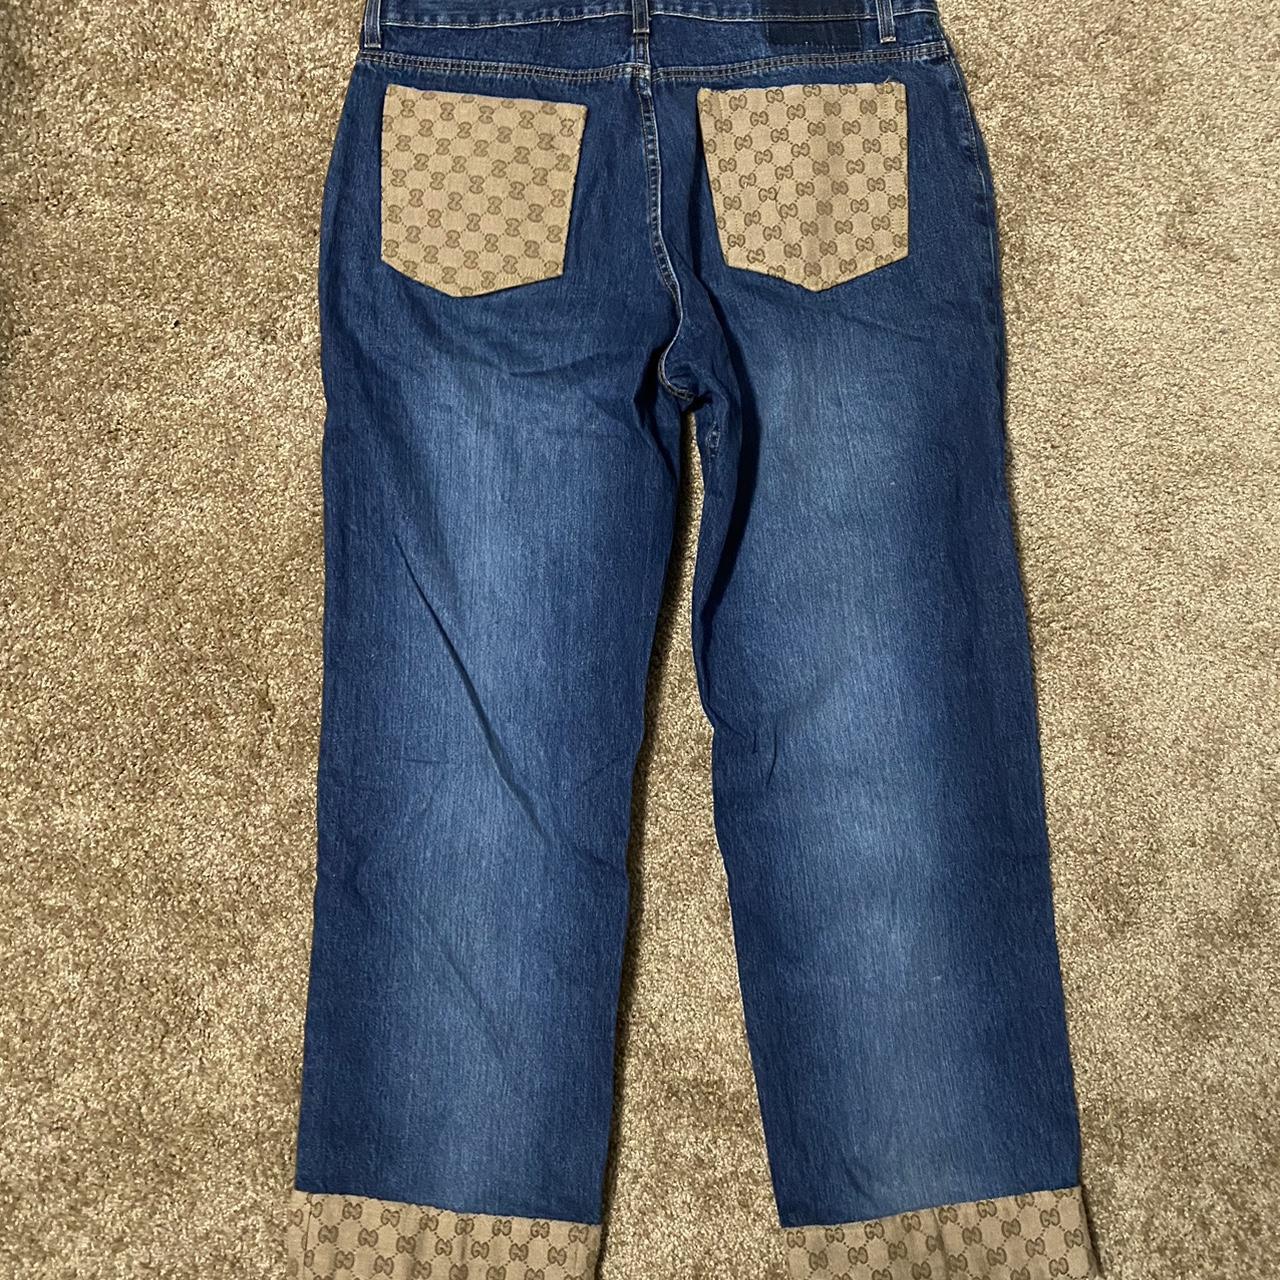 Mossimo Men's Blue and Gold Jeans (3)